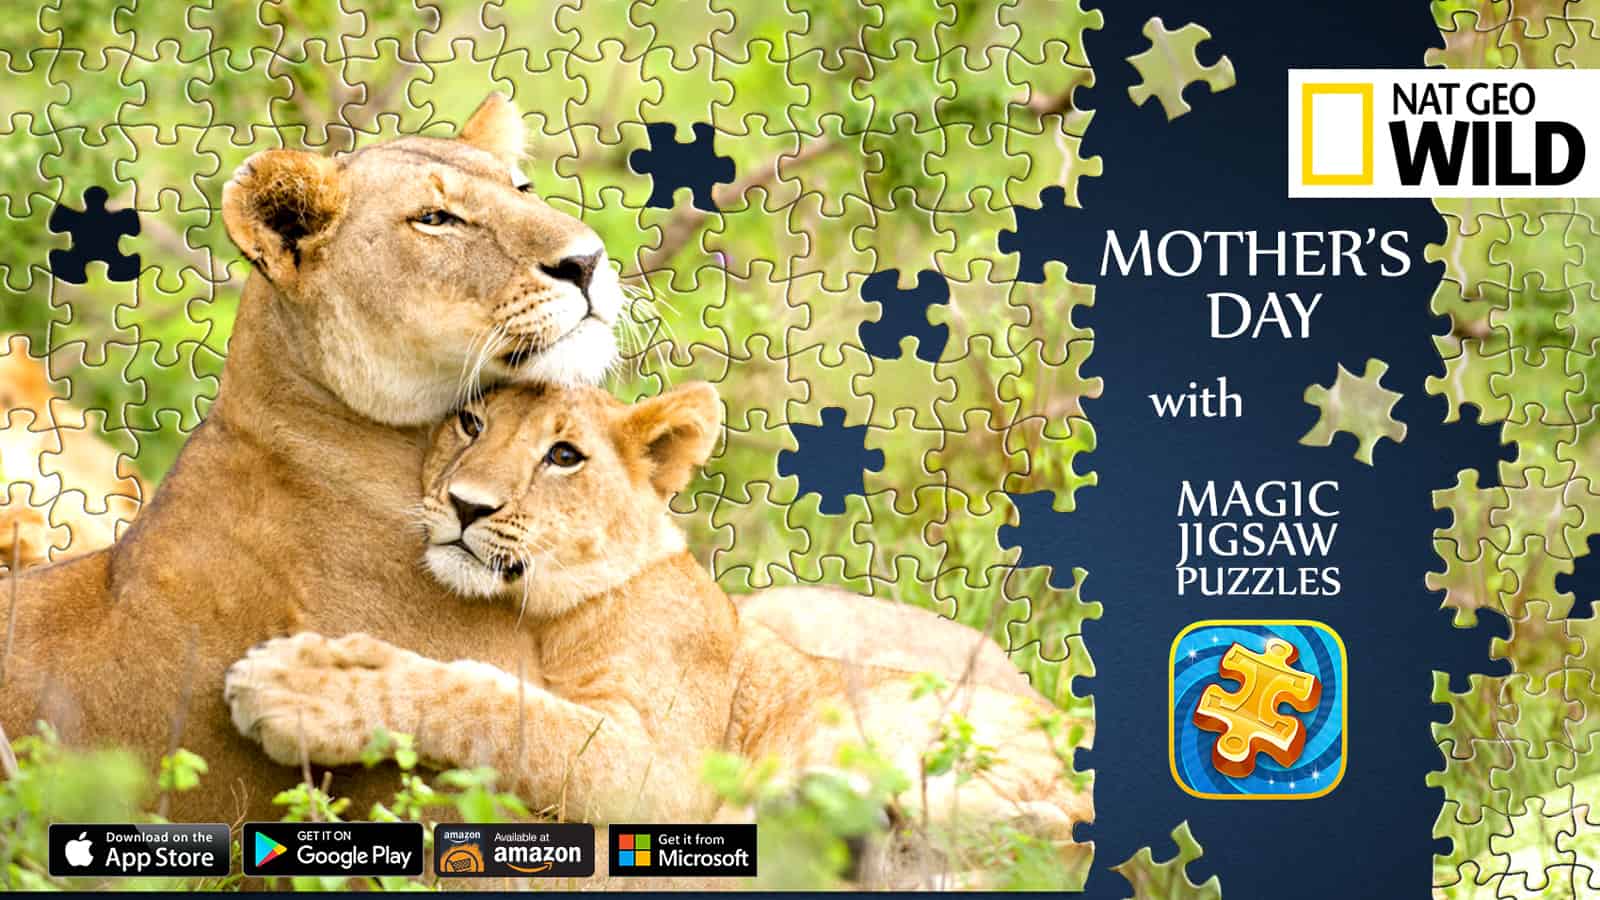 jigsaw puzzles national geographic